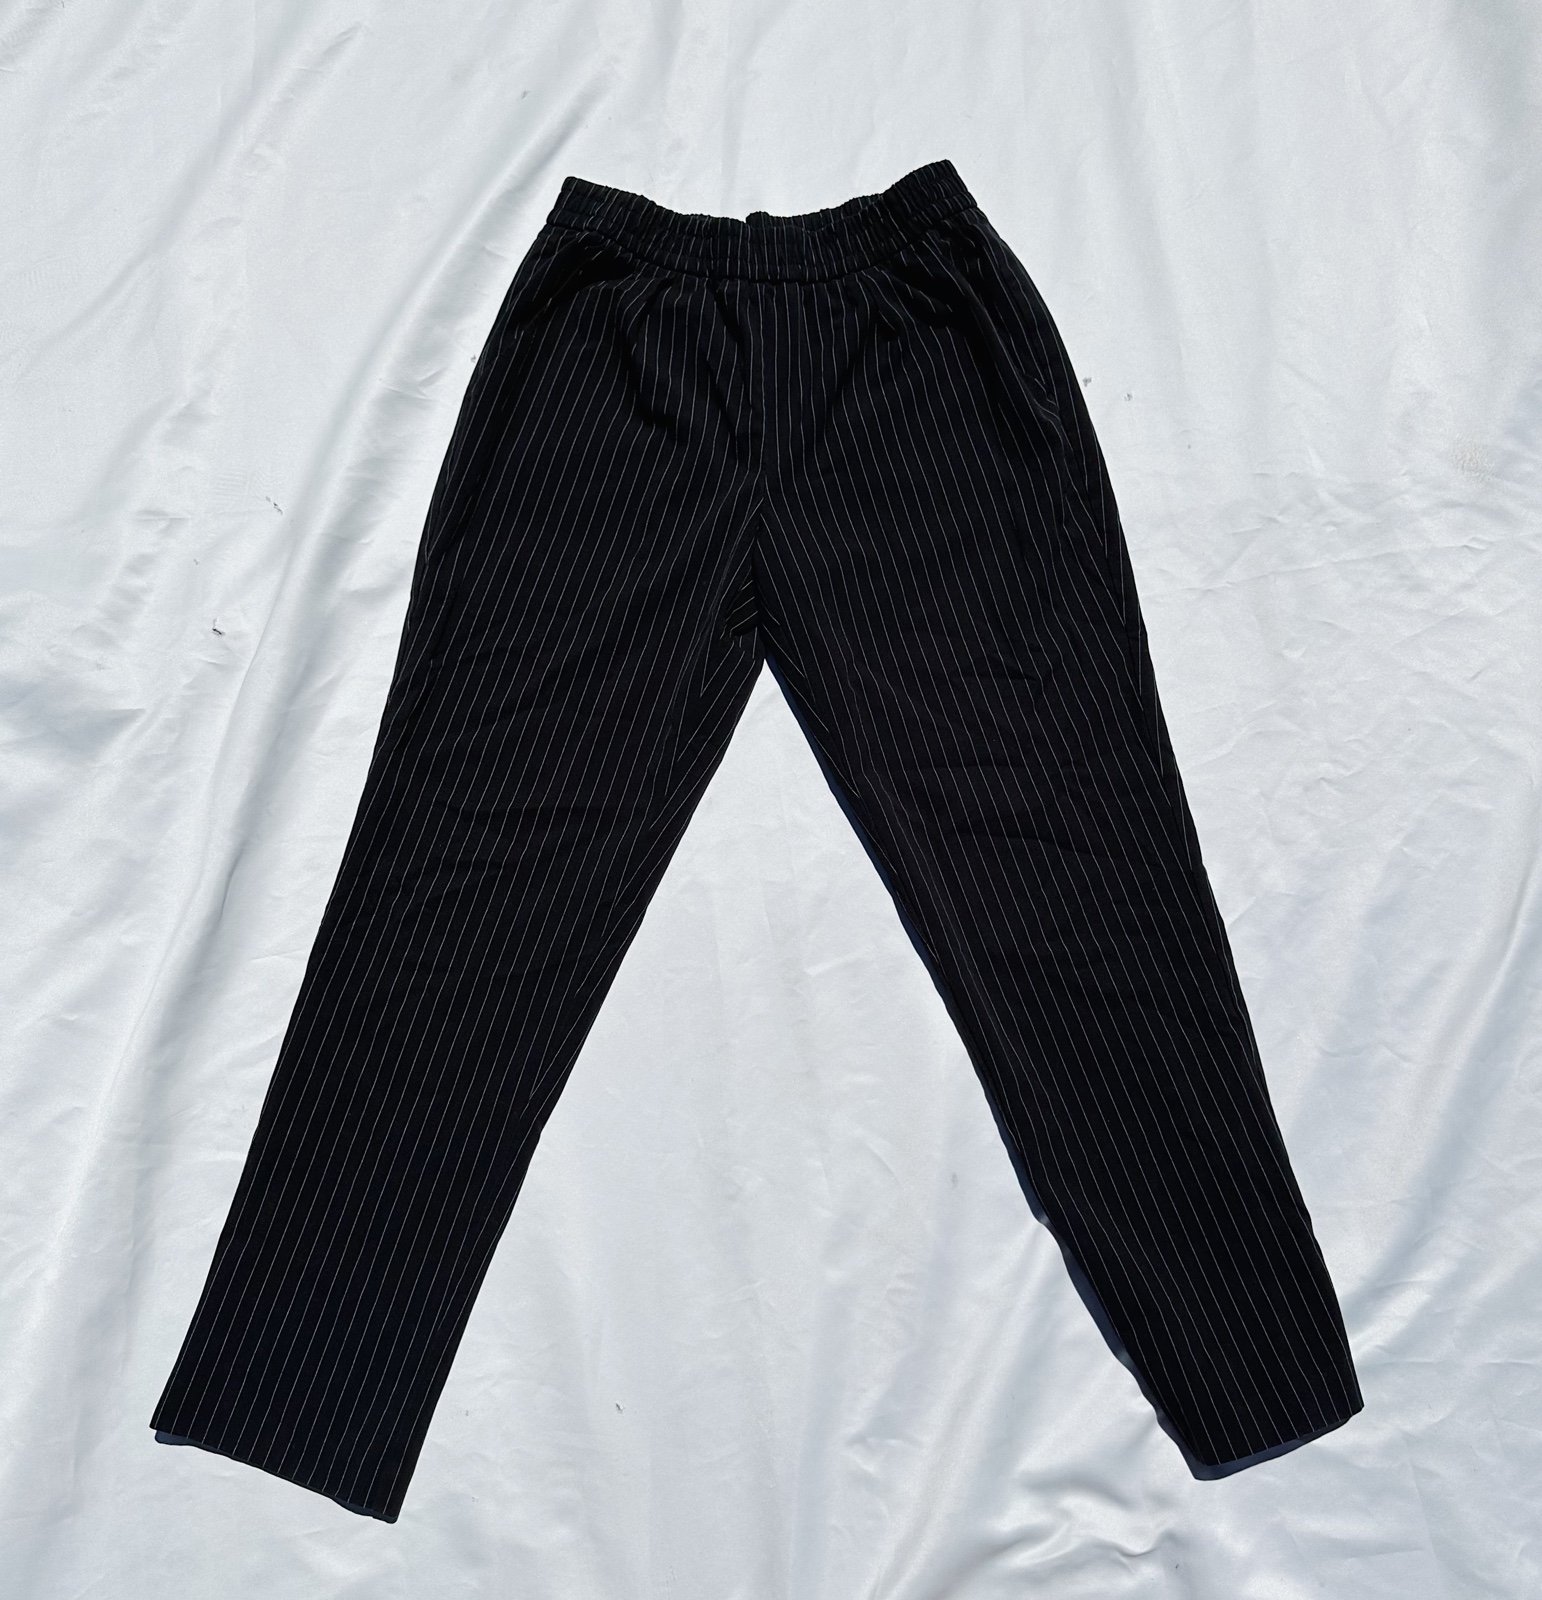 High quality High rise striped Pants KVUFVePxW Counter 